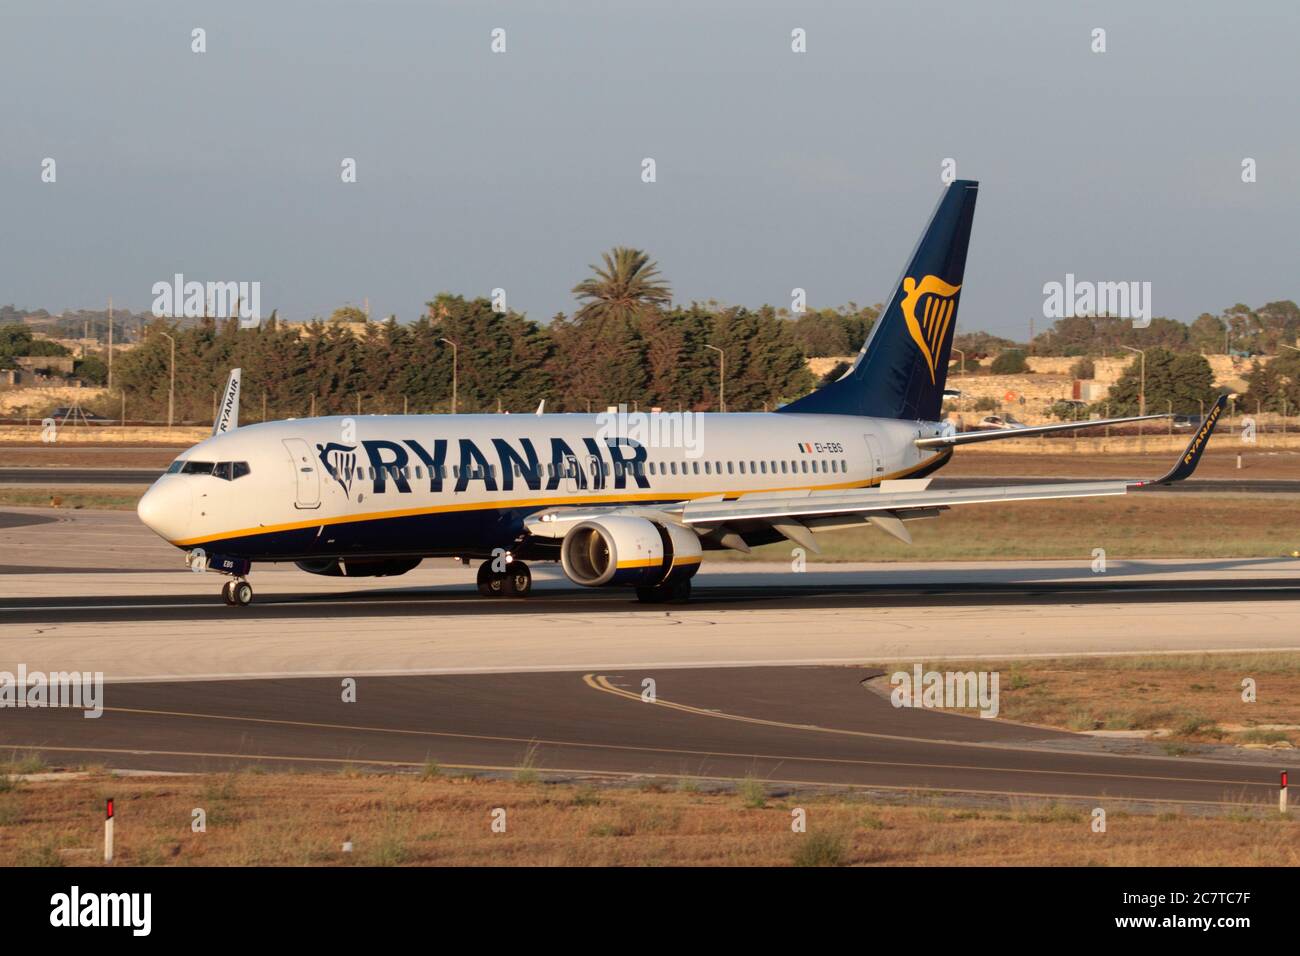 Ryanair plane. Boeing 737-800 passenger jet airplane flown by low cost airline Ryan air on the runway after arriving in Malta Stock Photo